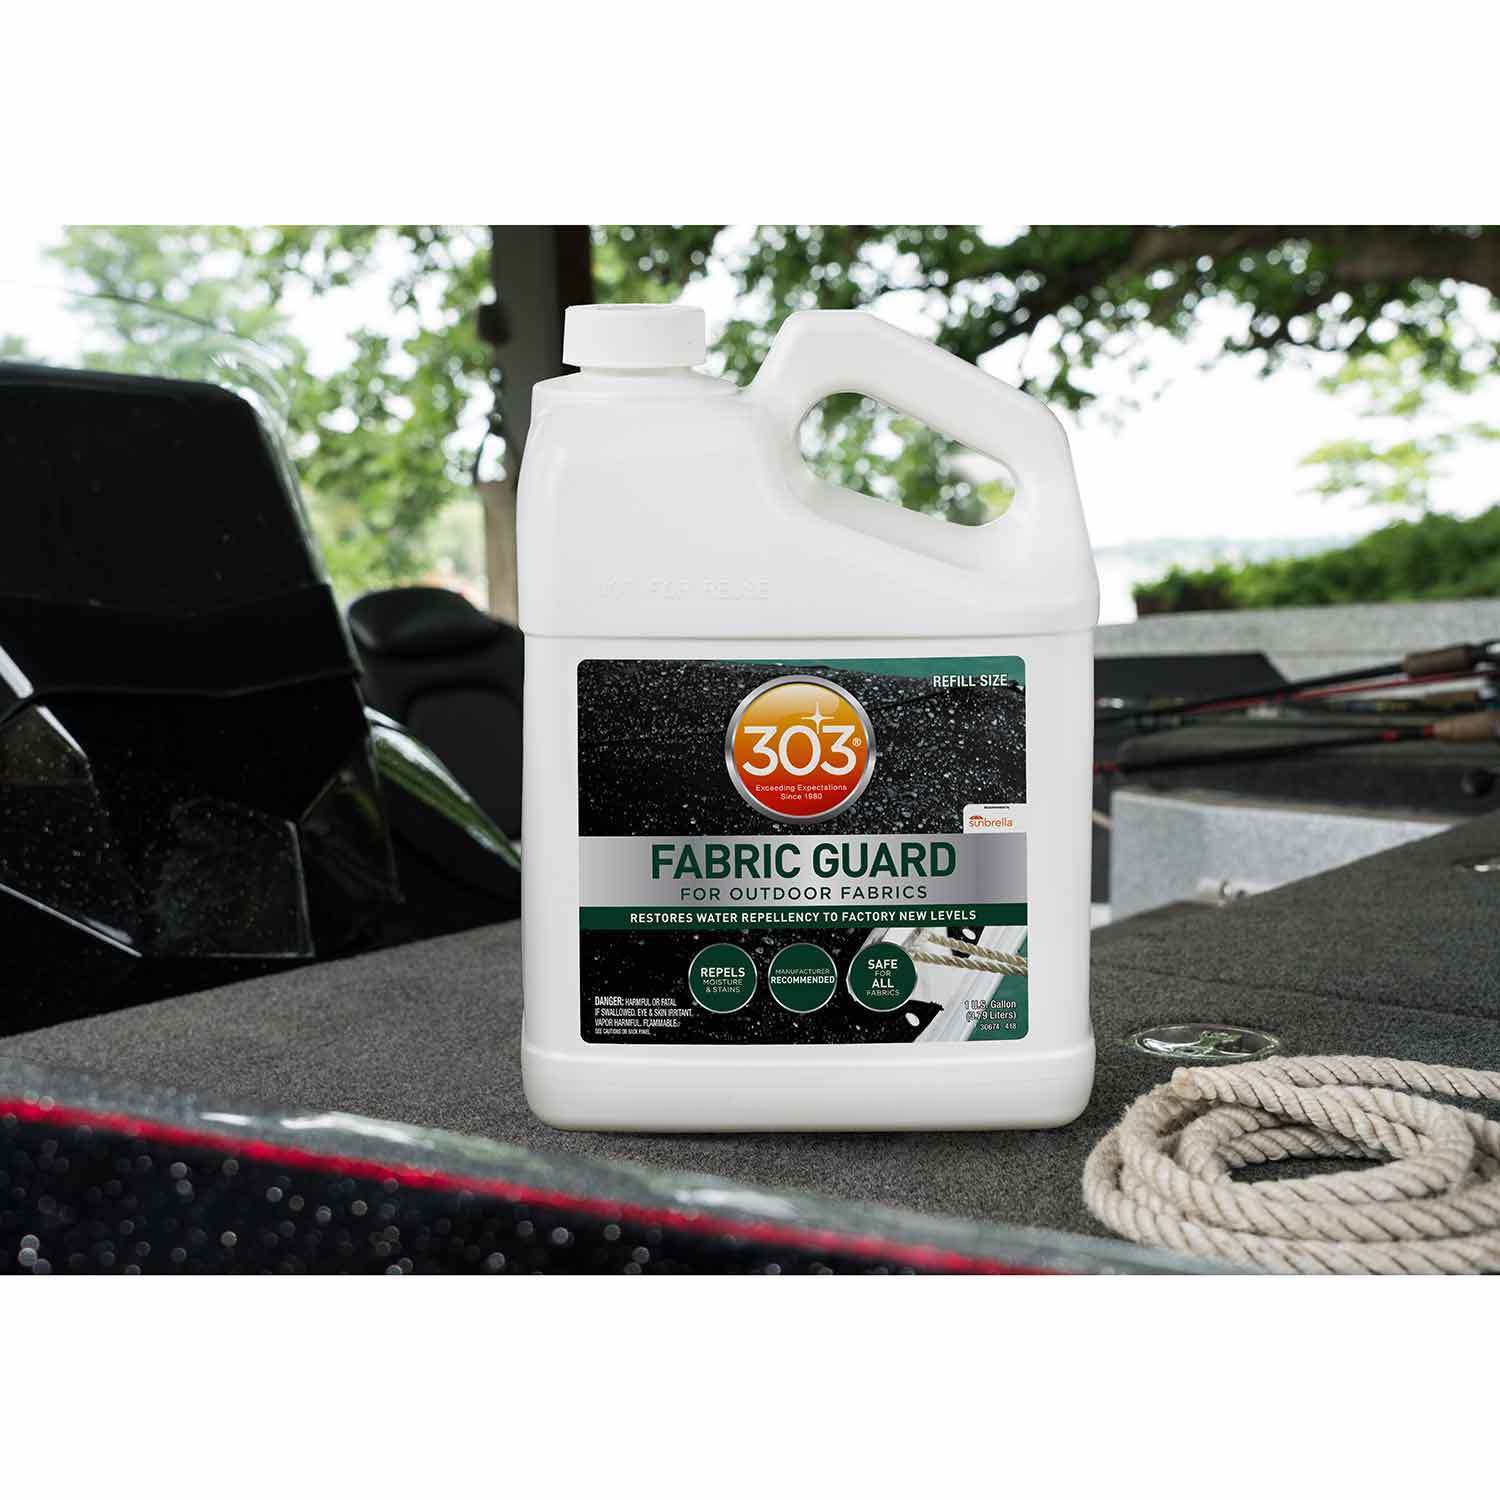 303 Marine Fabric Guard - Restores Water and Stain Repellency to Factory New Levels, Simple and Easy to Use, Manufacturer Recommended, Safe for All